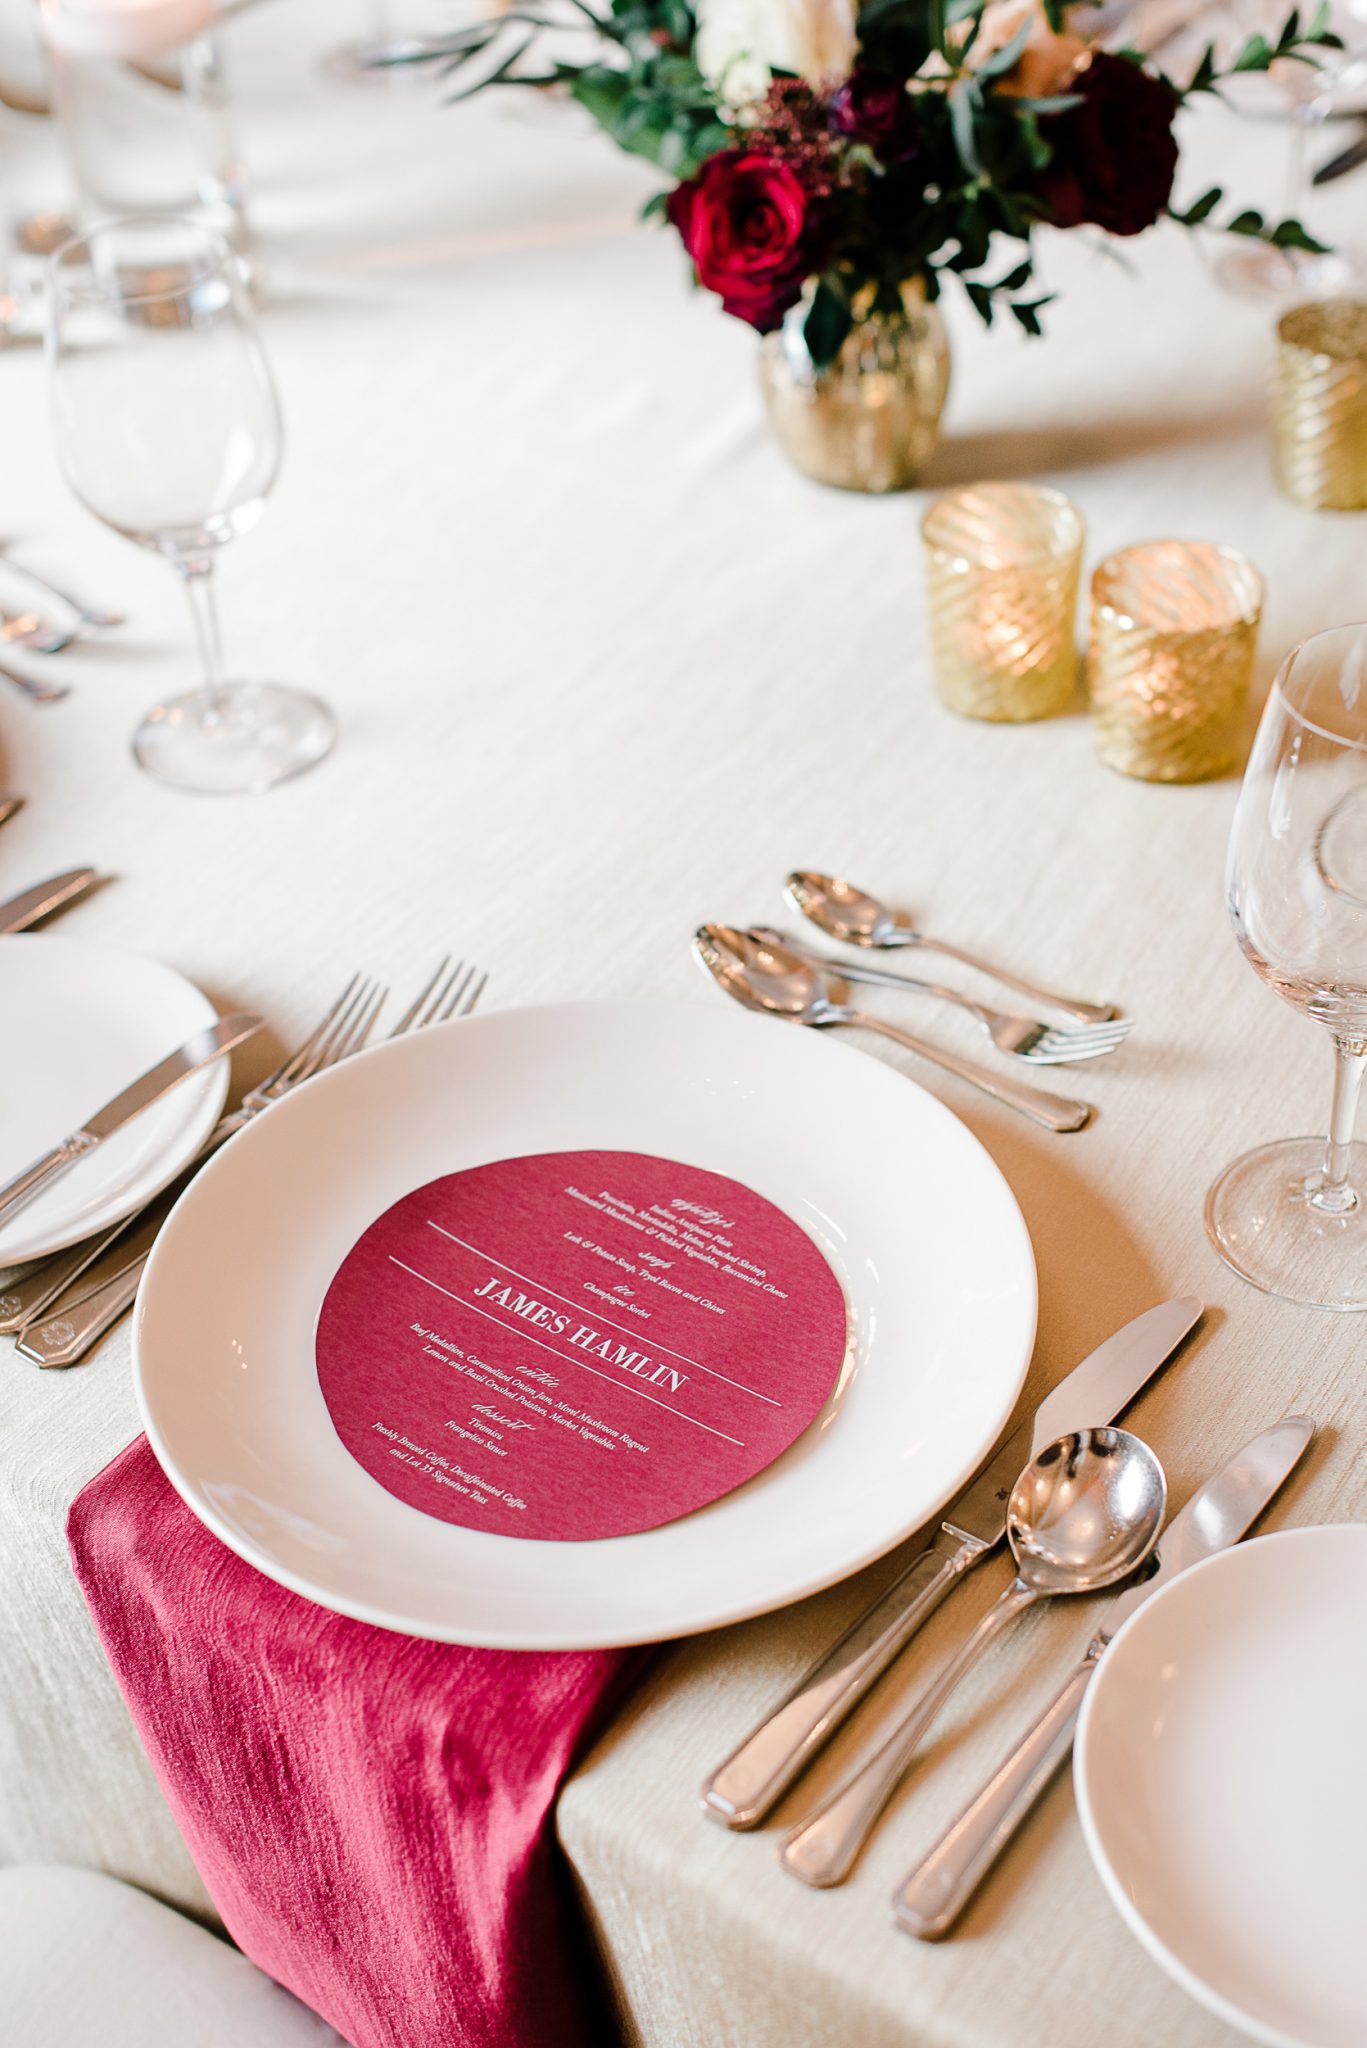 White and red winter wedding table menu inspiration